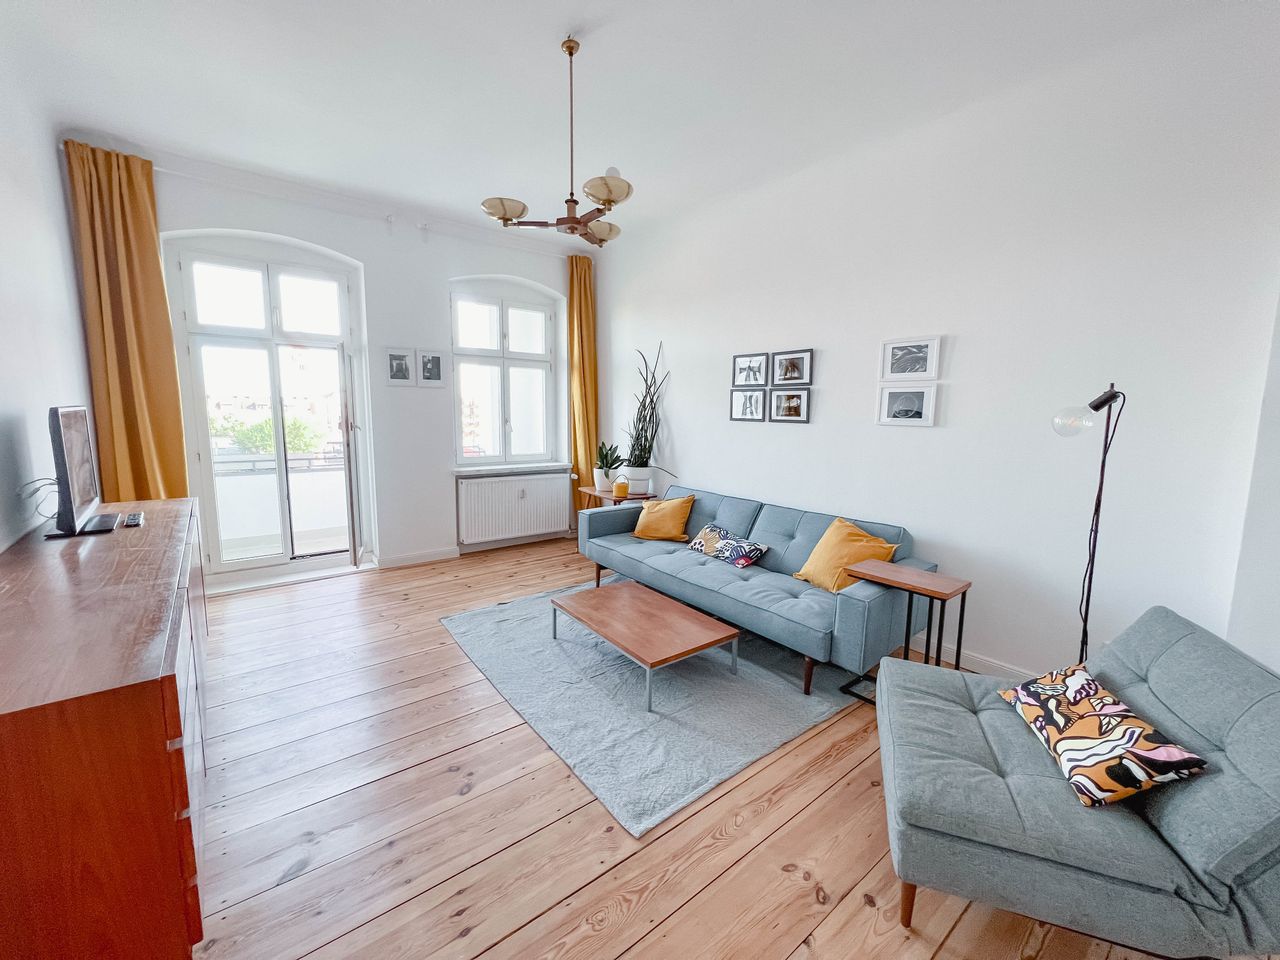 Bright, airy and well located artist apartment in hip Neukölln